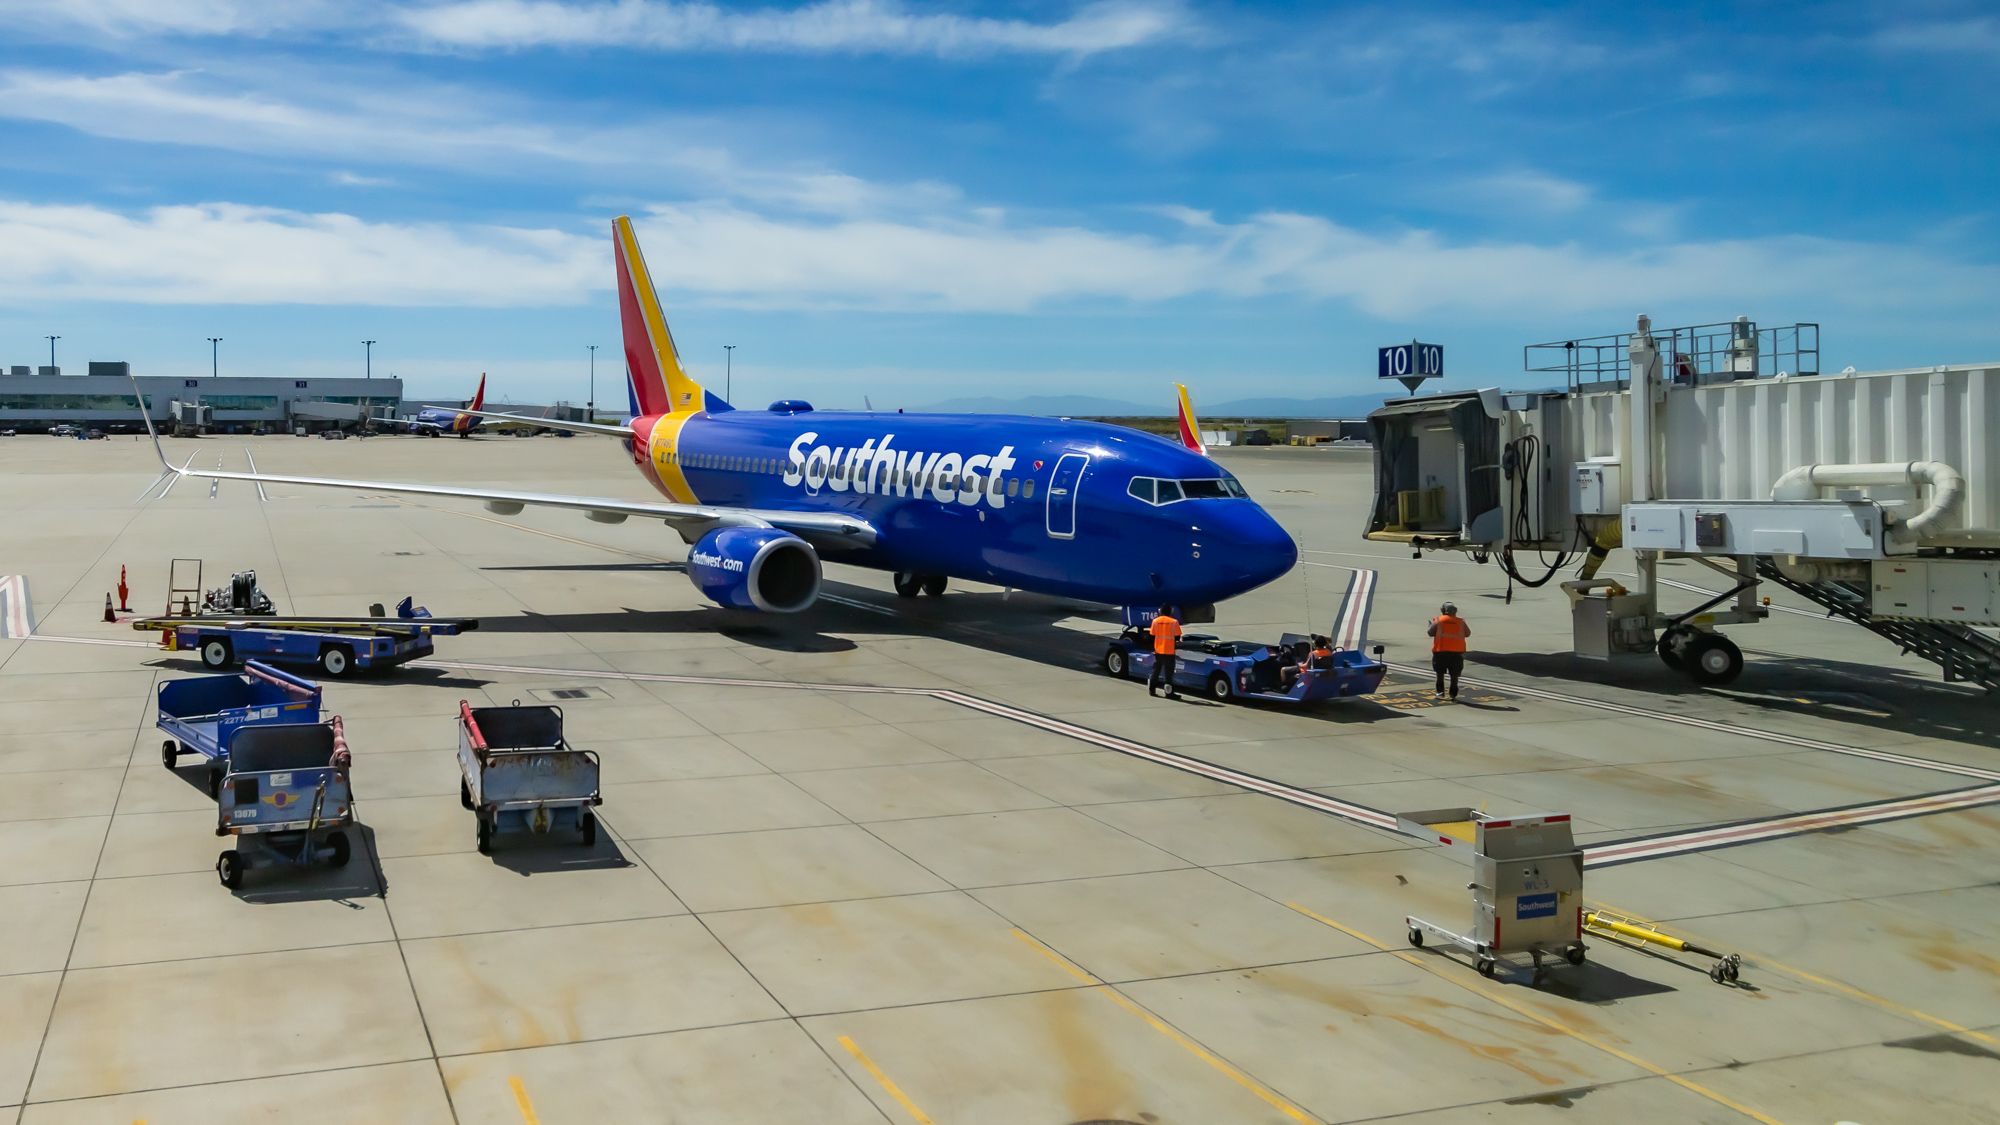 A Southwest Airlines Boeing 737 being pushed back from the gate.